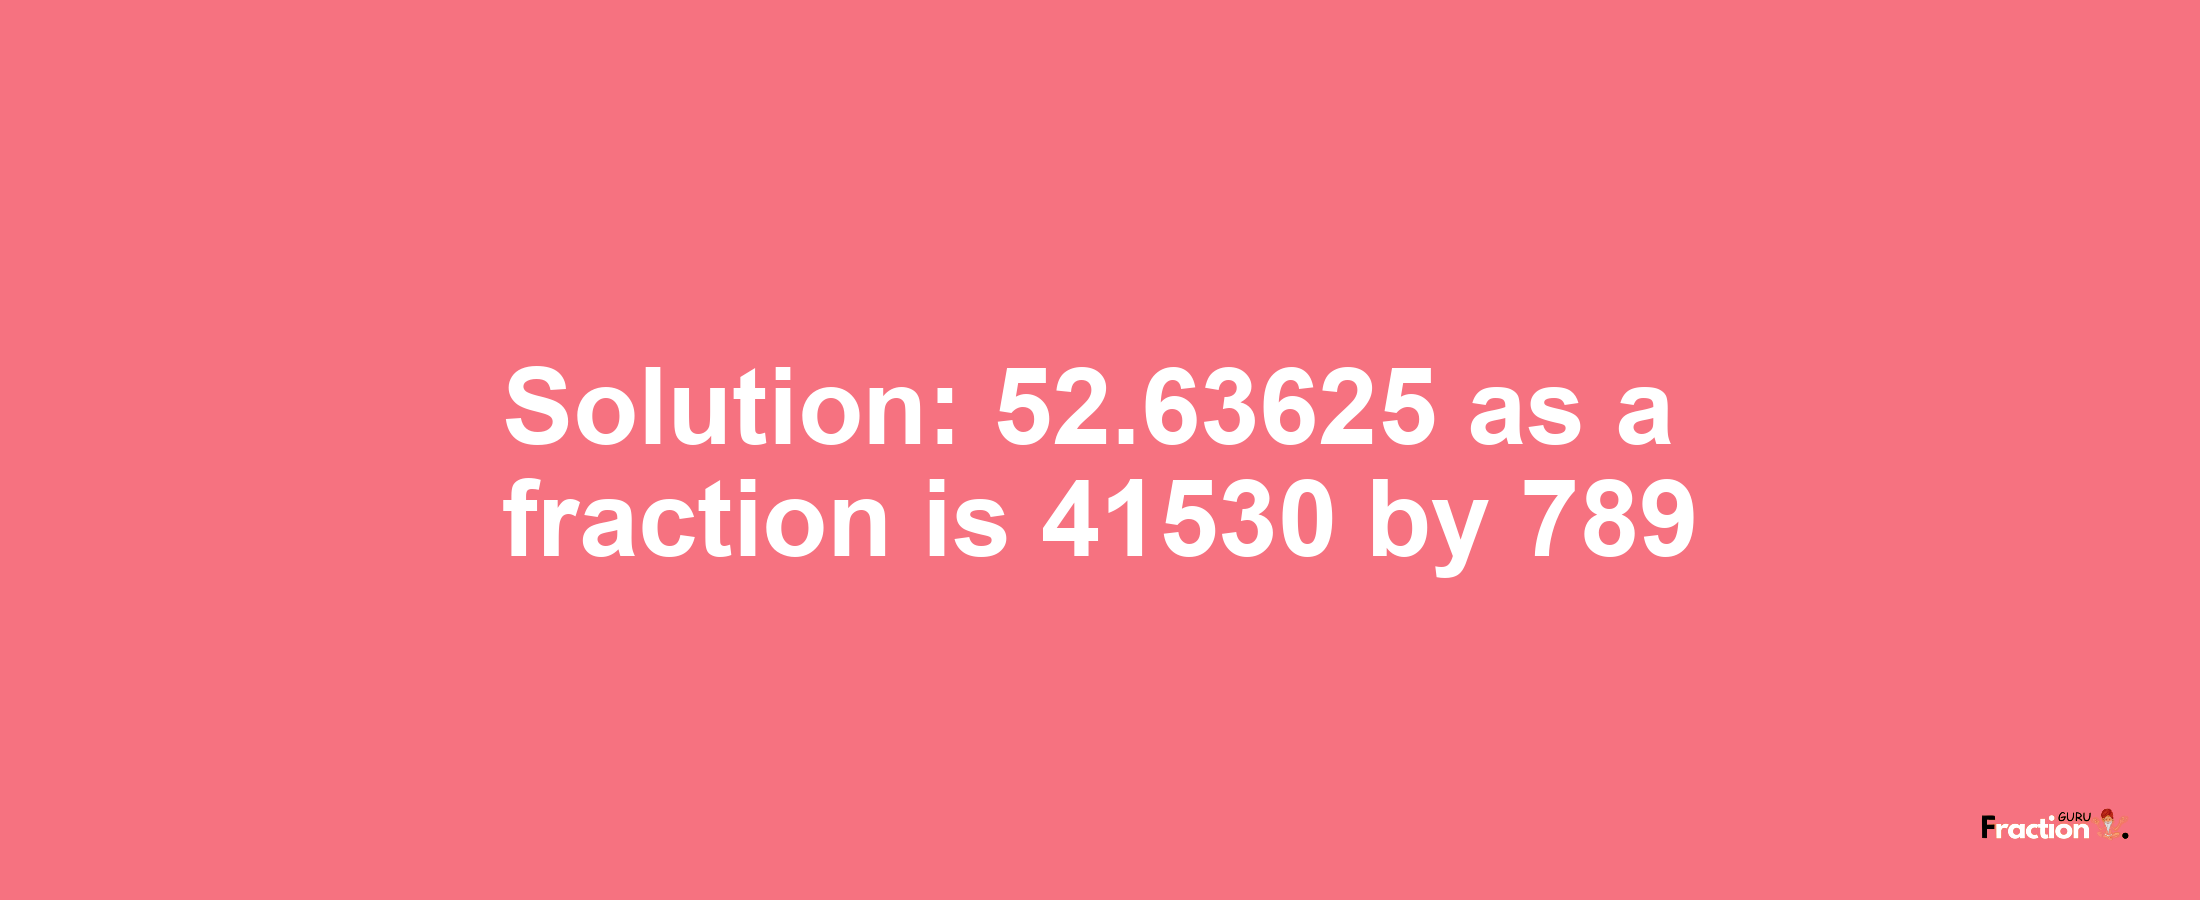 Solution:52.63625 as a fraction is 41530/789